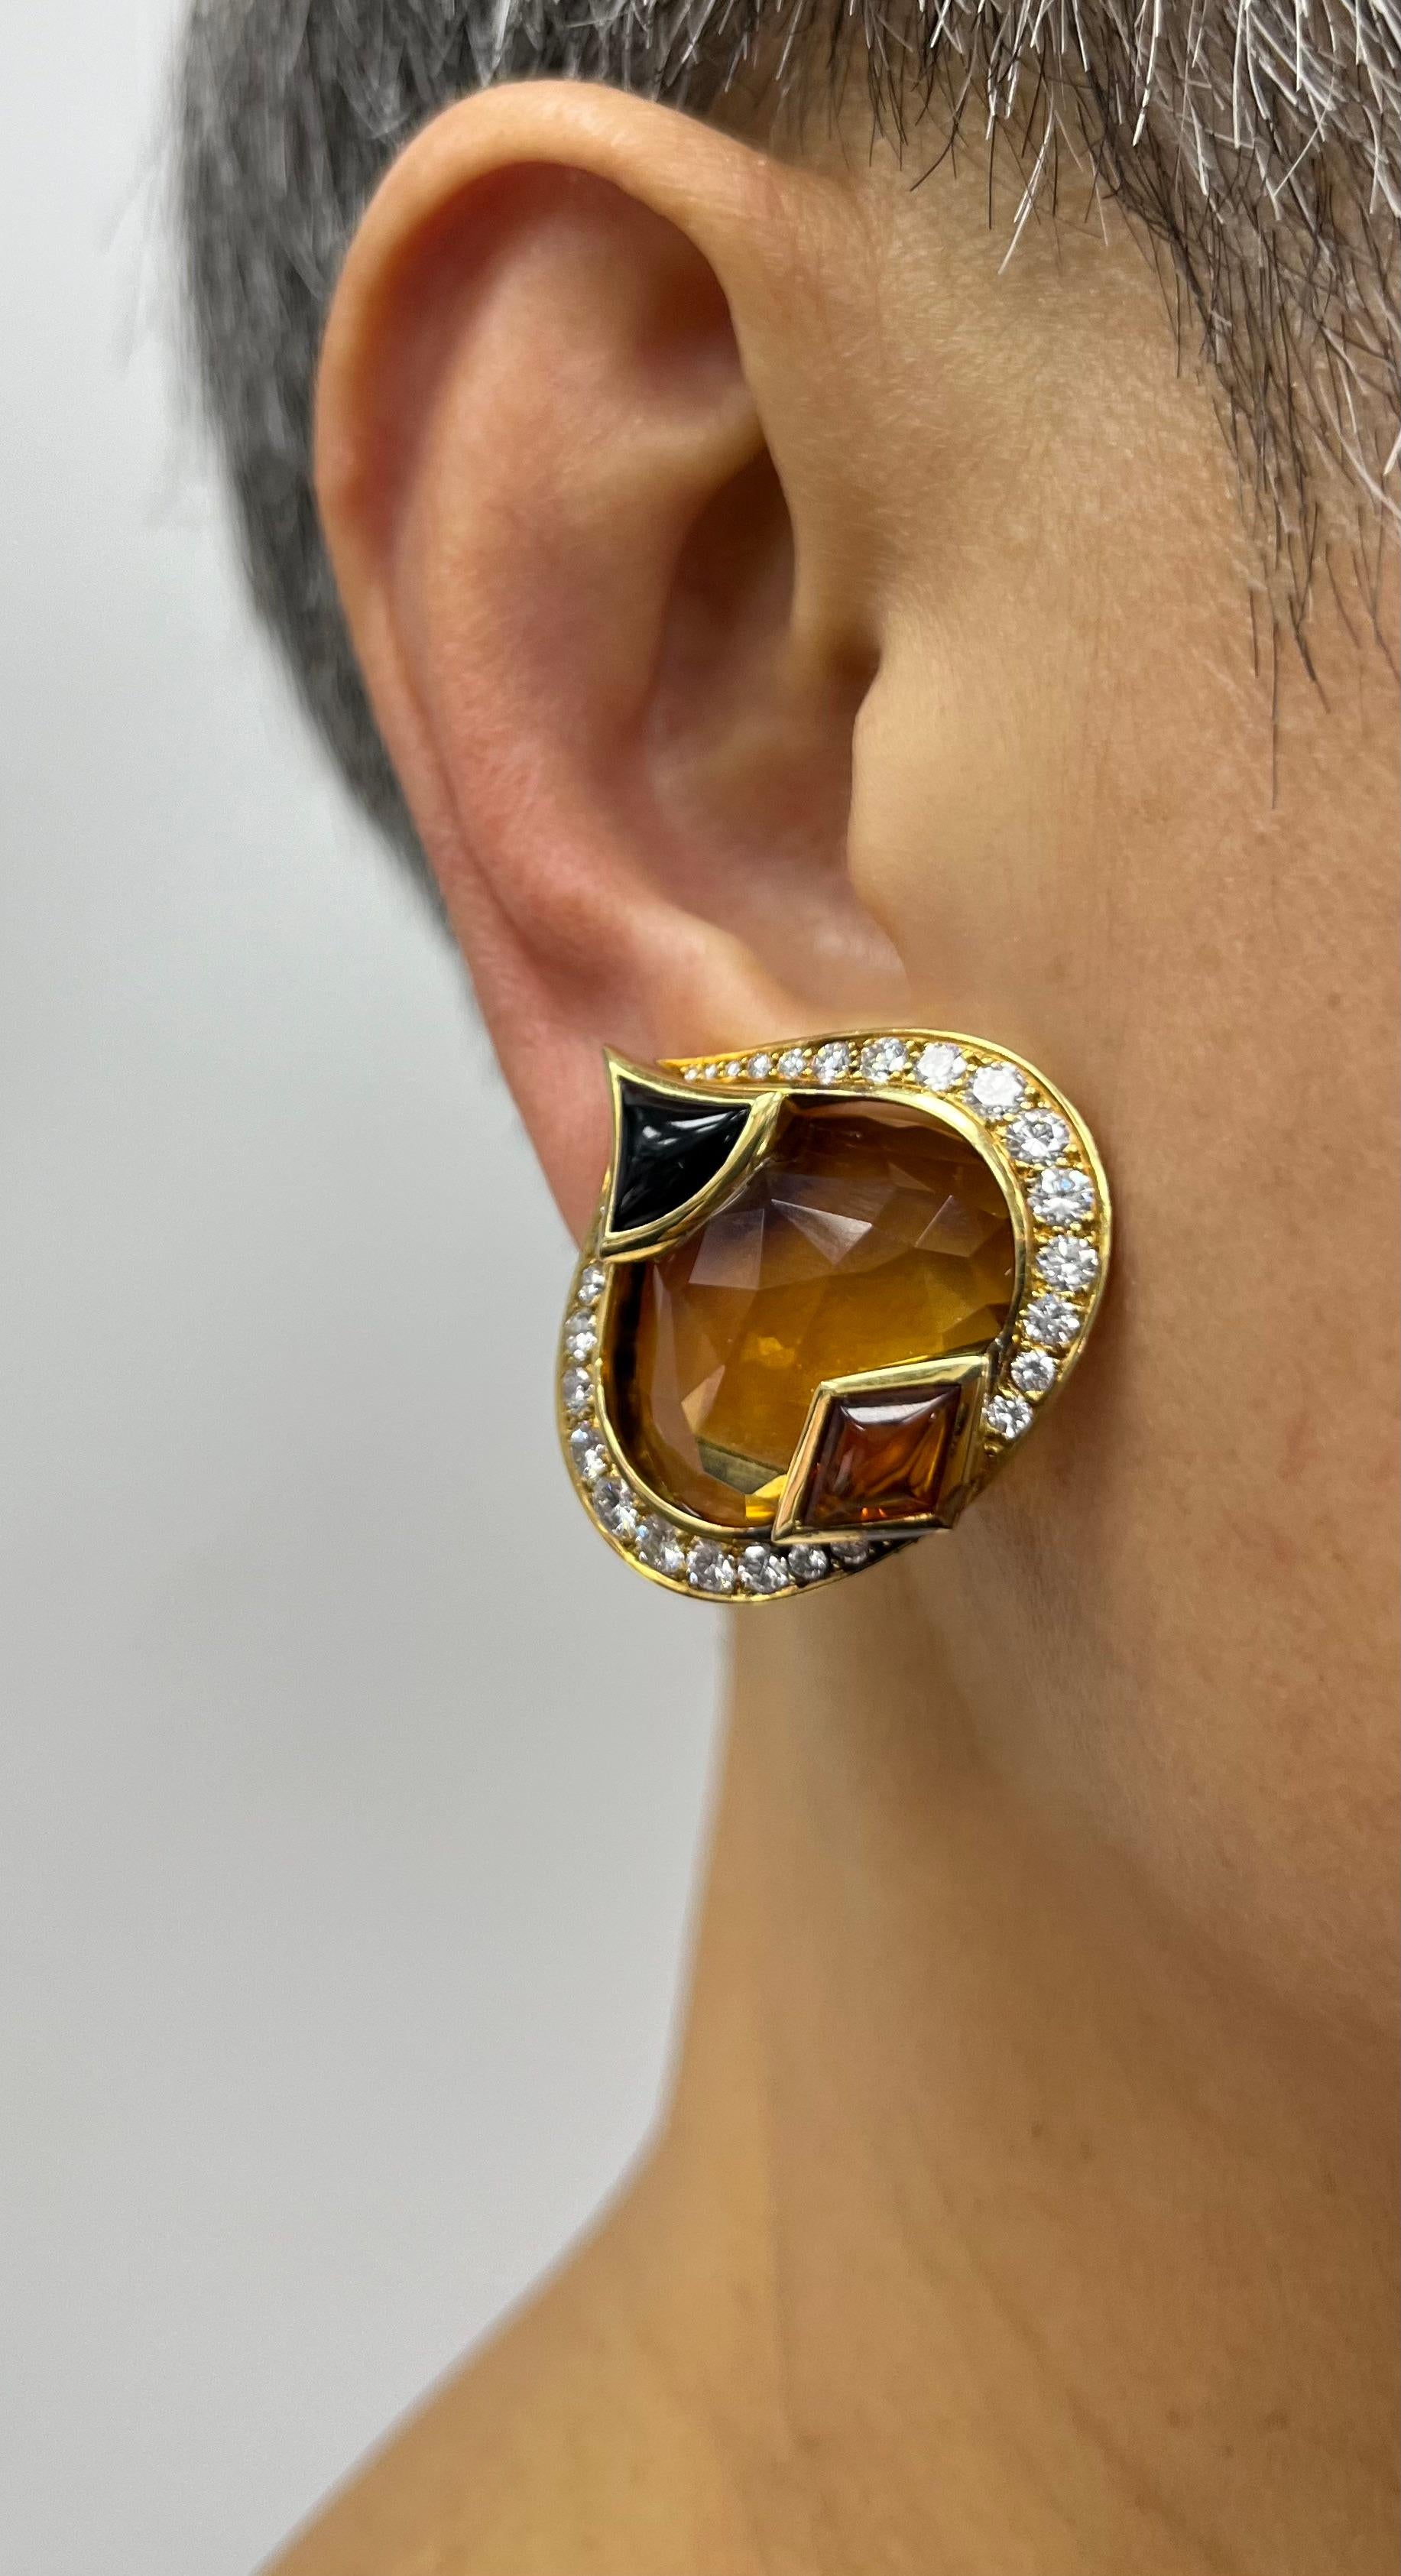 Marked: 1985 750 Marina B. FRANCE 
18K Yellow Gold Diamond Facet cut and Cabochon Citrine and Onyx Earrings
with 60 diamonds approx over 2.00 cts E-F color VS Clarity
Measurement: 32 x 30 mm